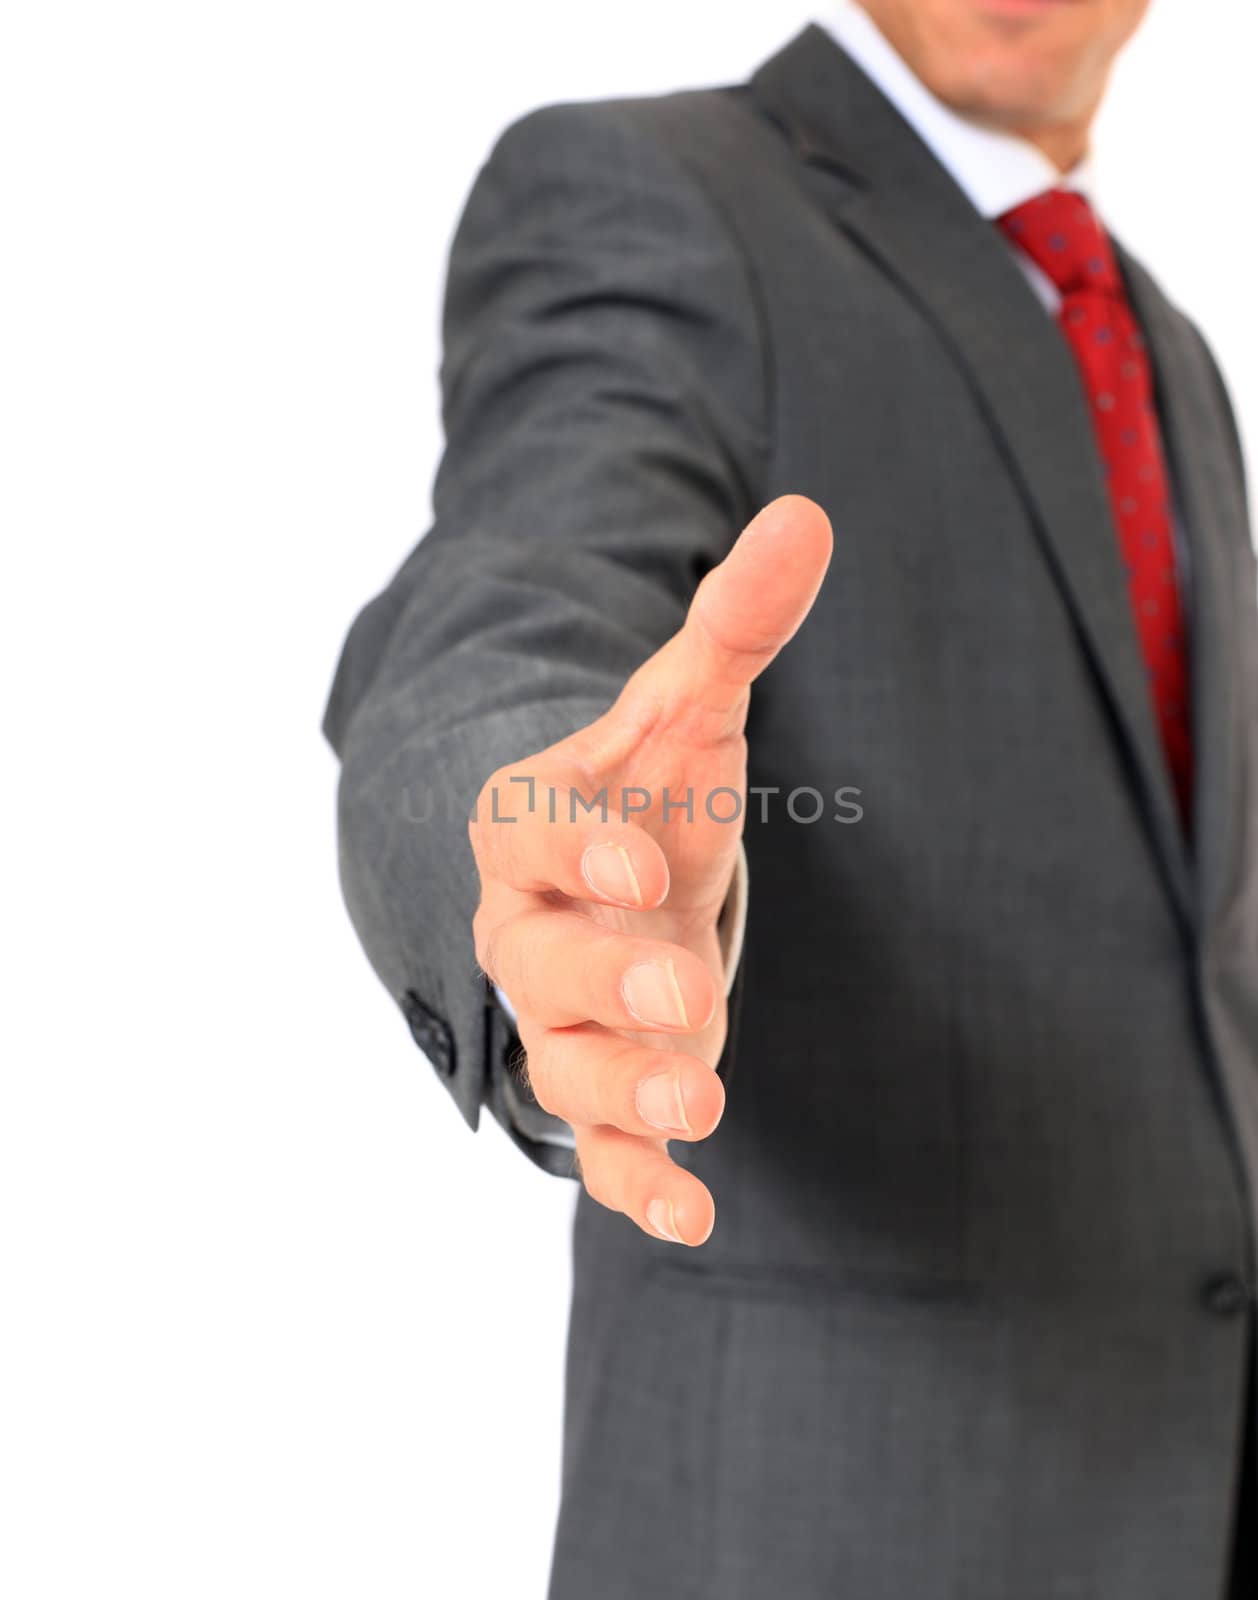 Attractive businessman welcoming someone. All on white background.